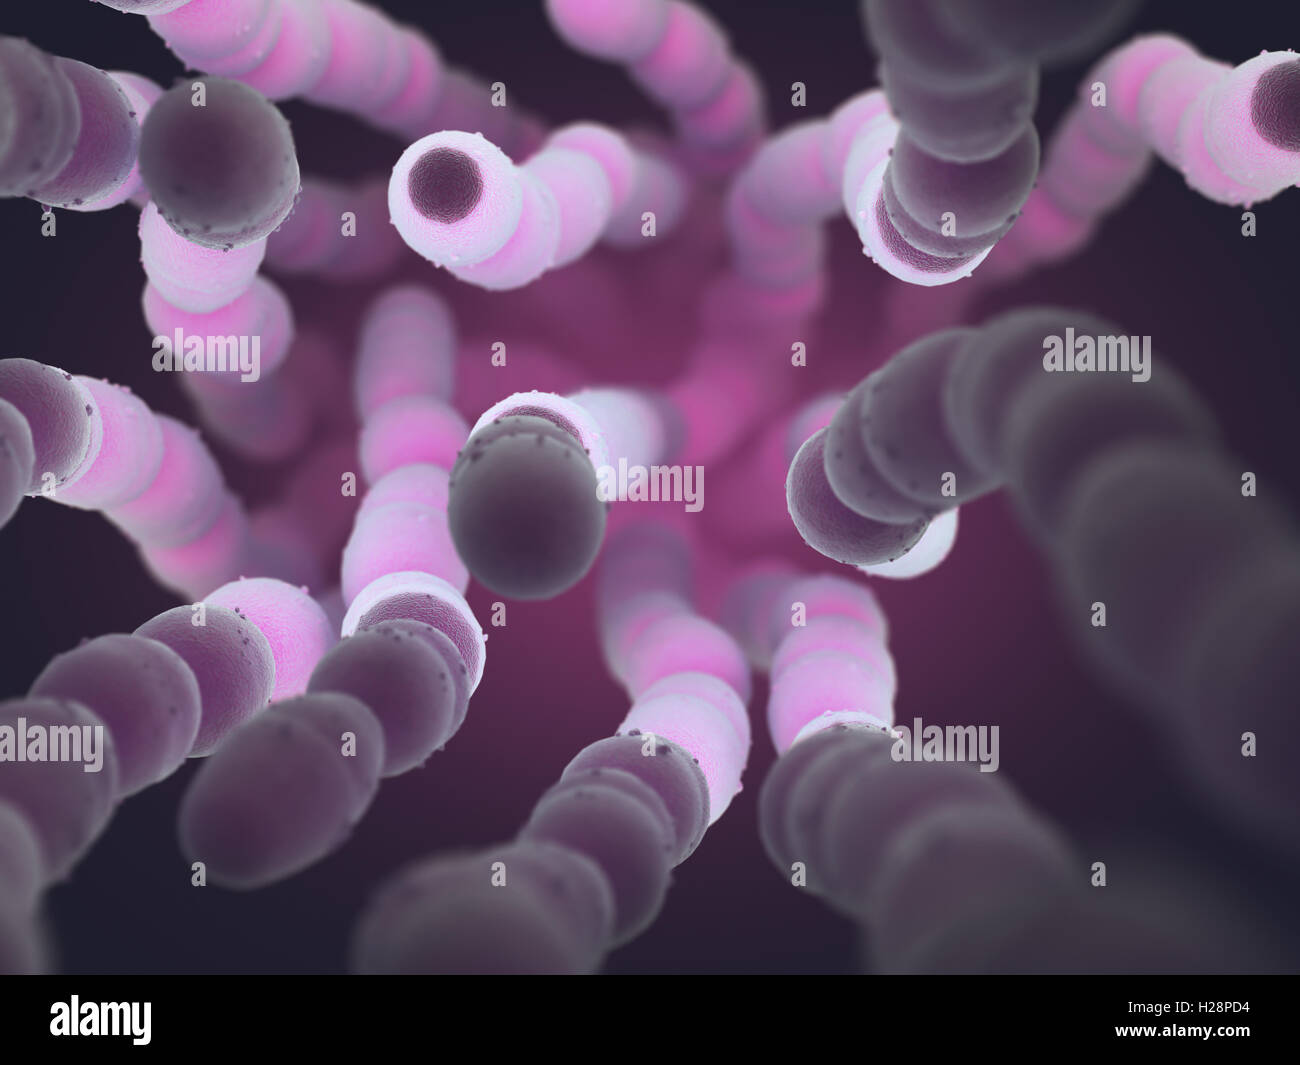 Streptococcus pneumoniae, or pneumococcus, is a gram-positive bacteria responsible for many types of pneumococcal infections. Stock Photo